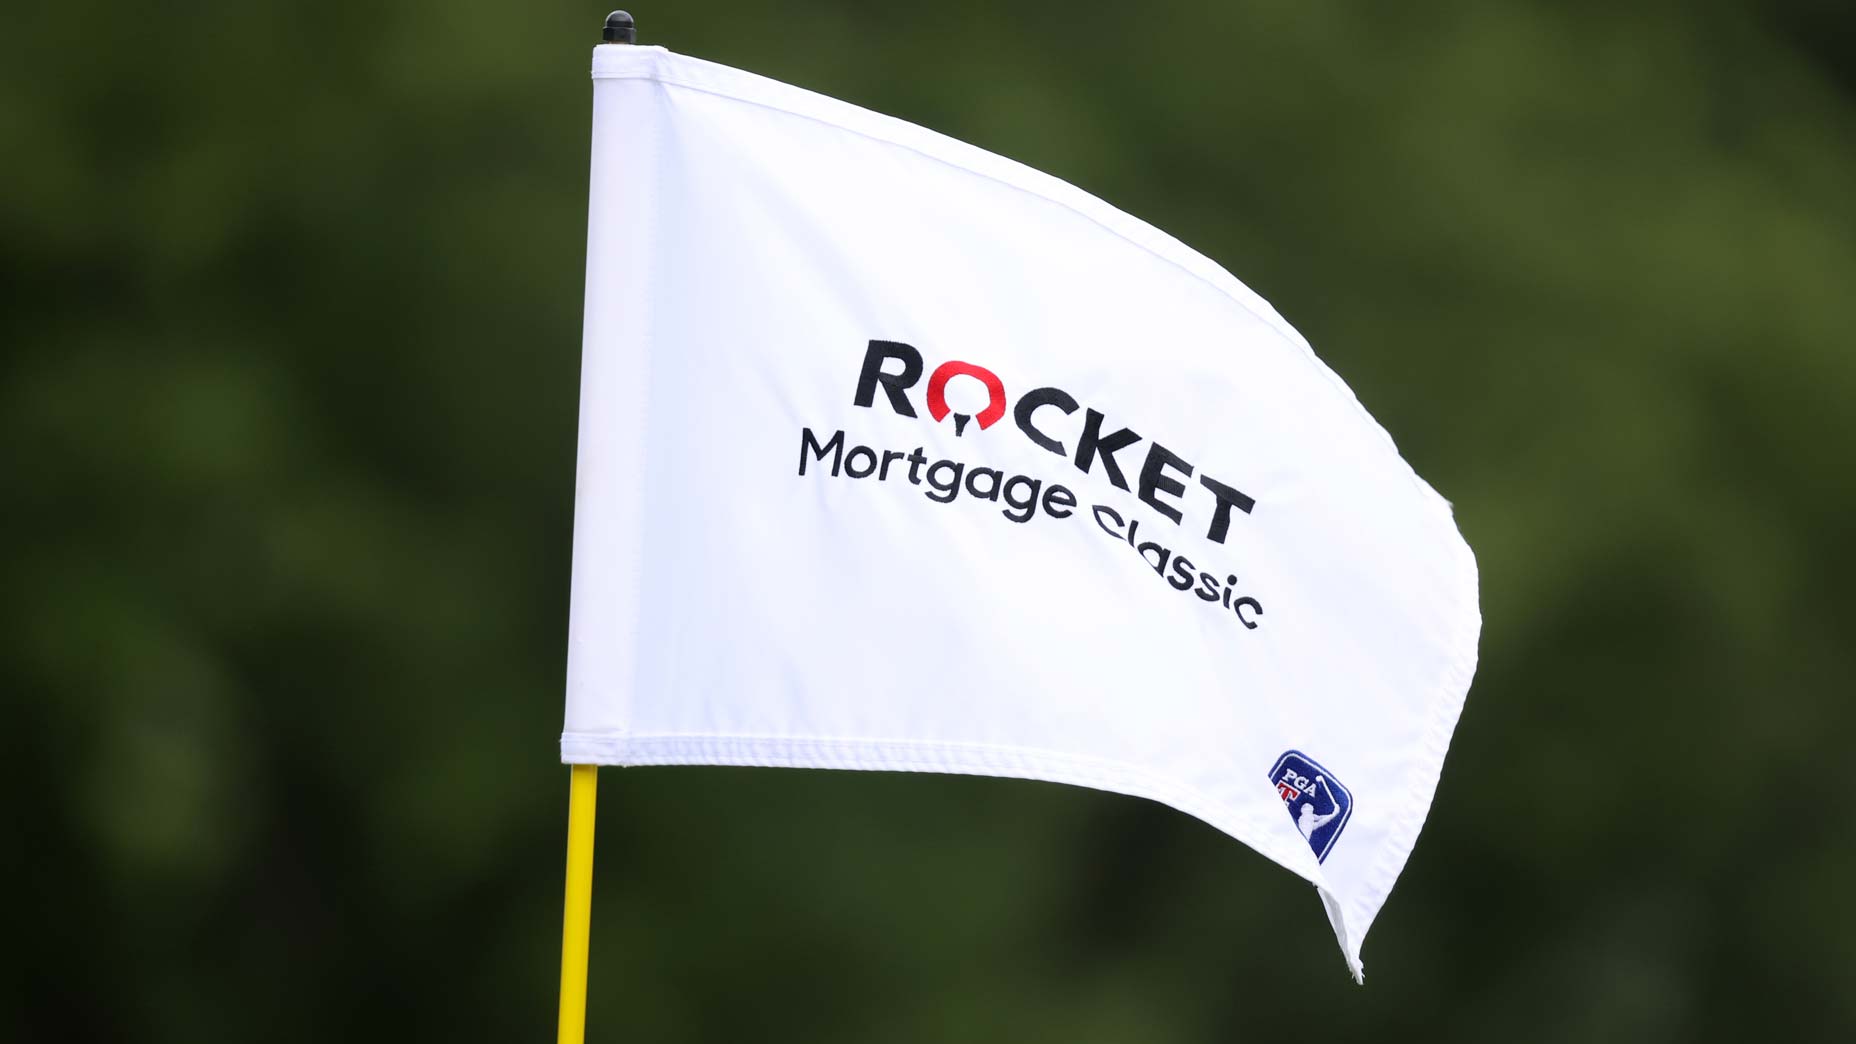 2021 Rocket Mortgage Classic live coverage How to watch on Saturday